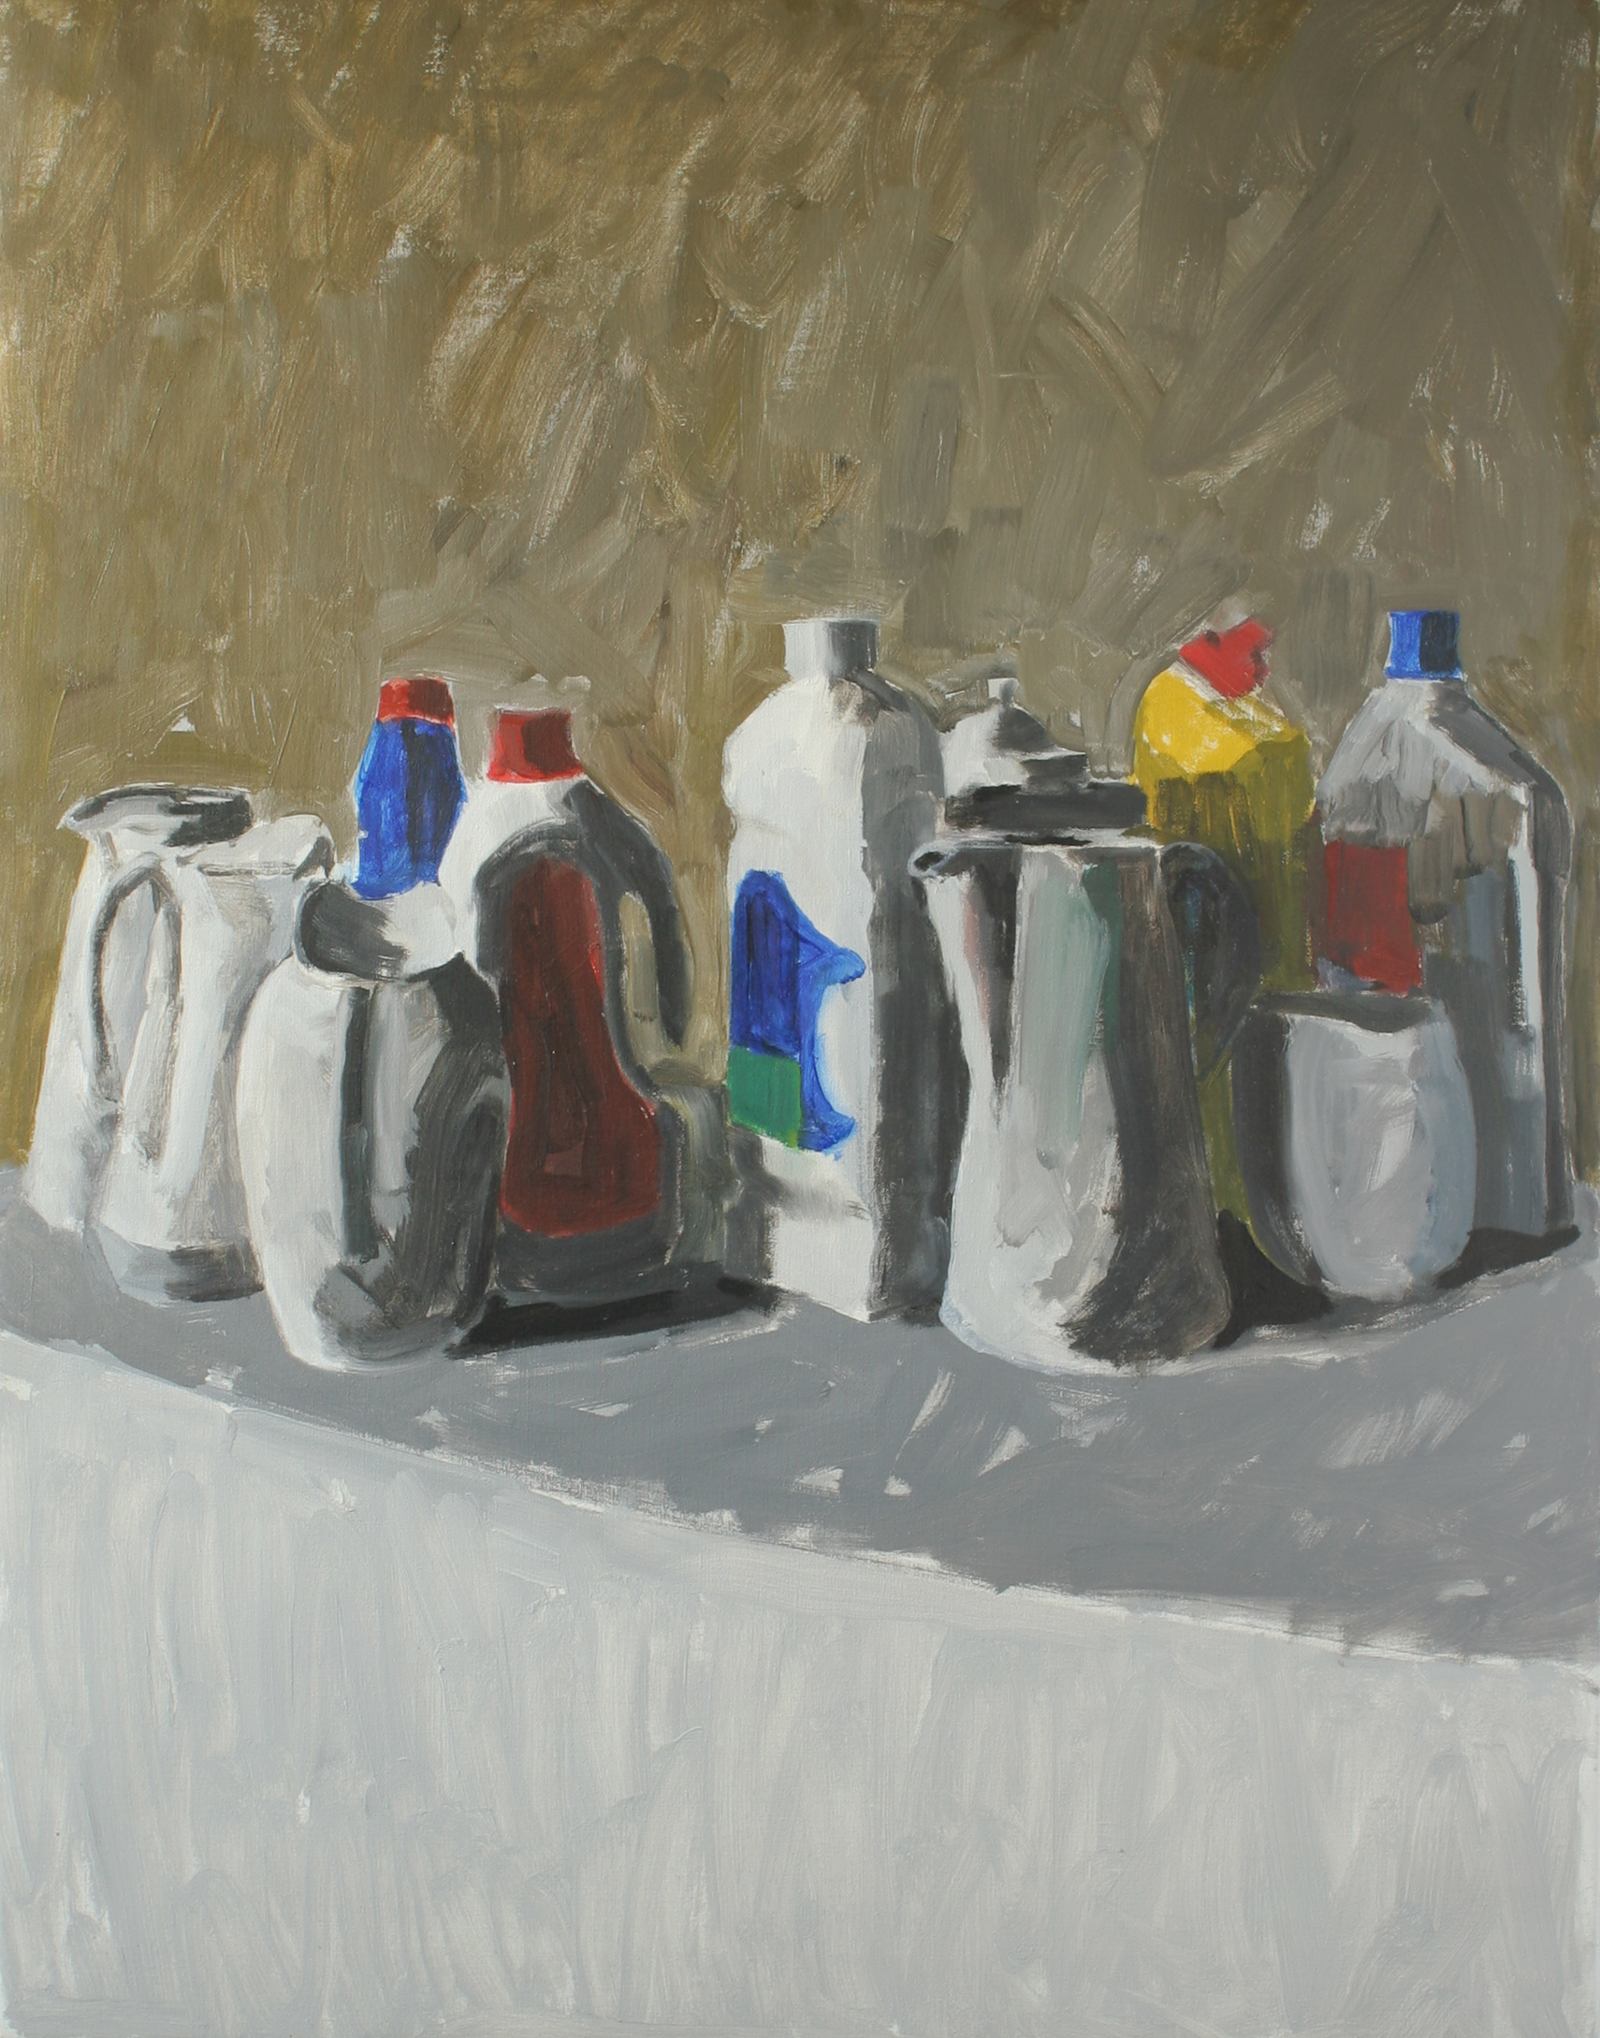 Jugs, bottles and coffee pots